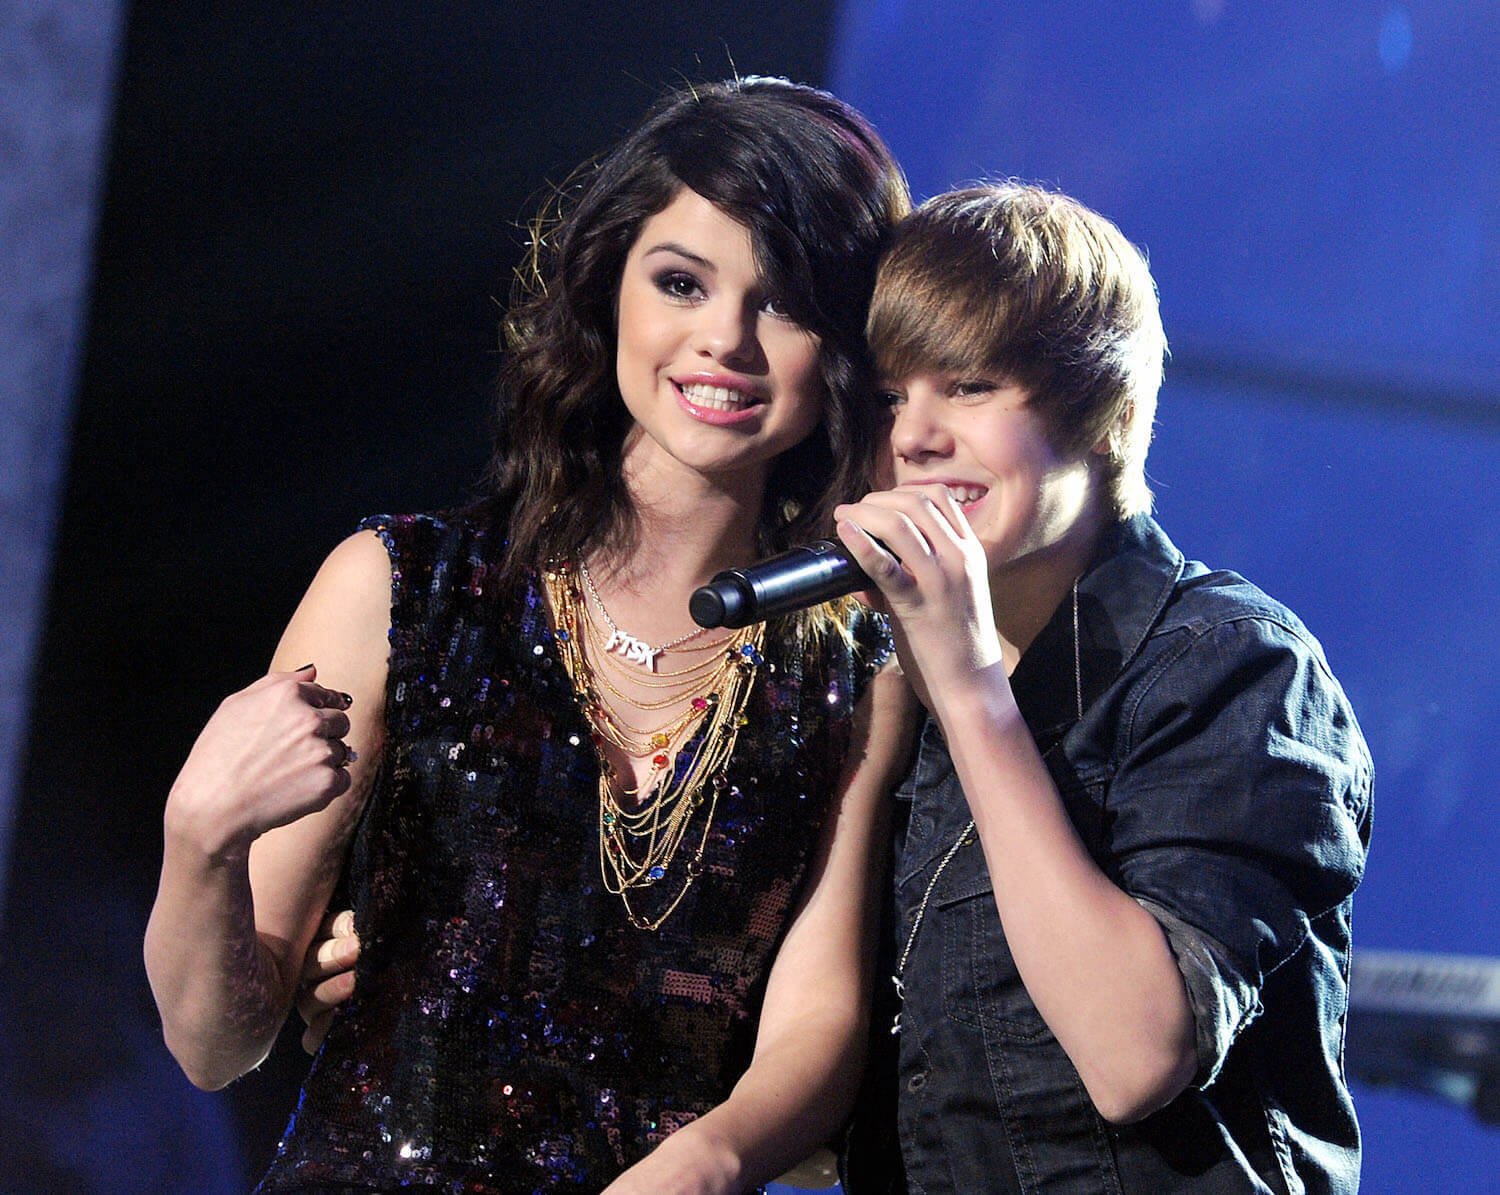 Selena Gomez and Justin Bieber on stage together for Dick Clark's New Year's Rockin' Eve in 2010